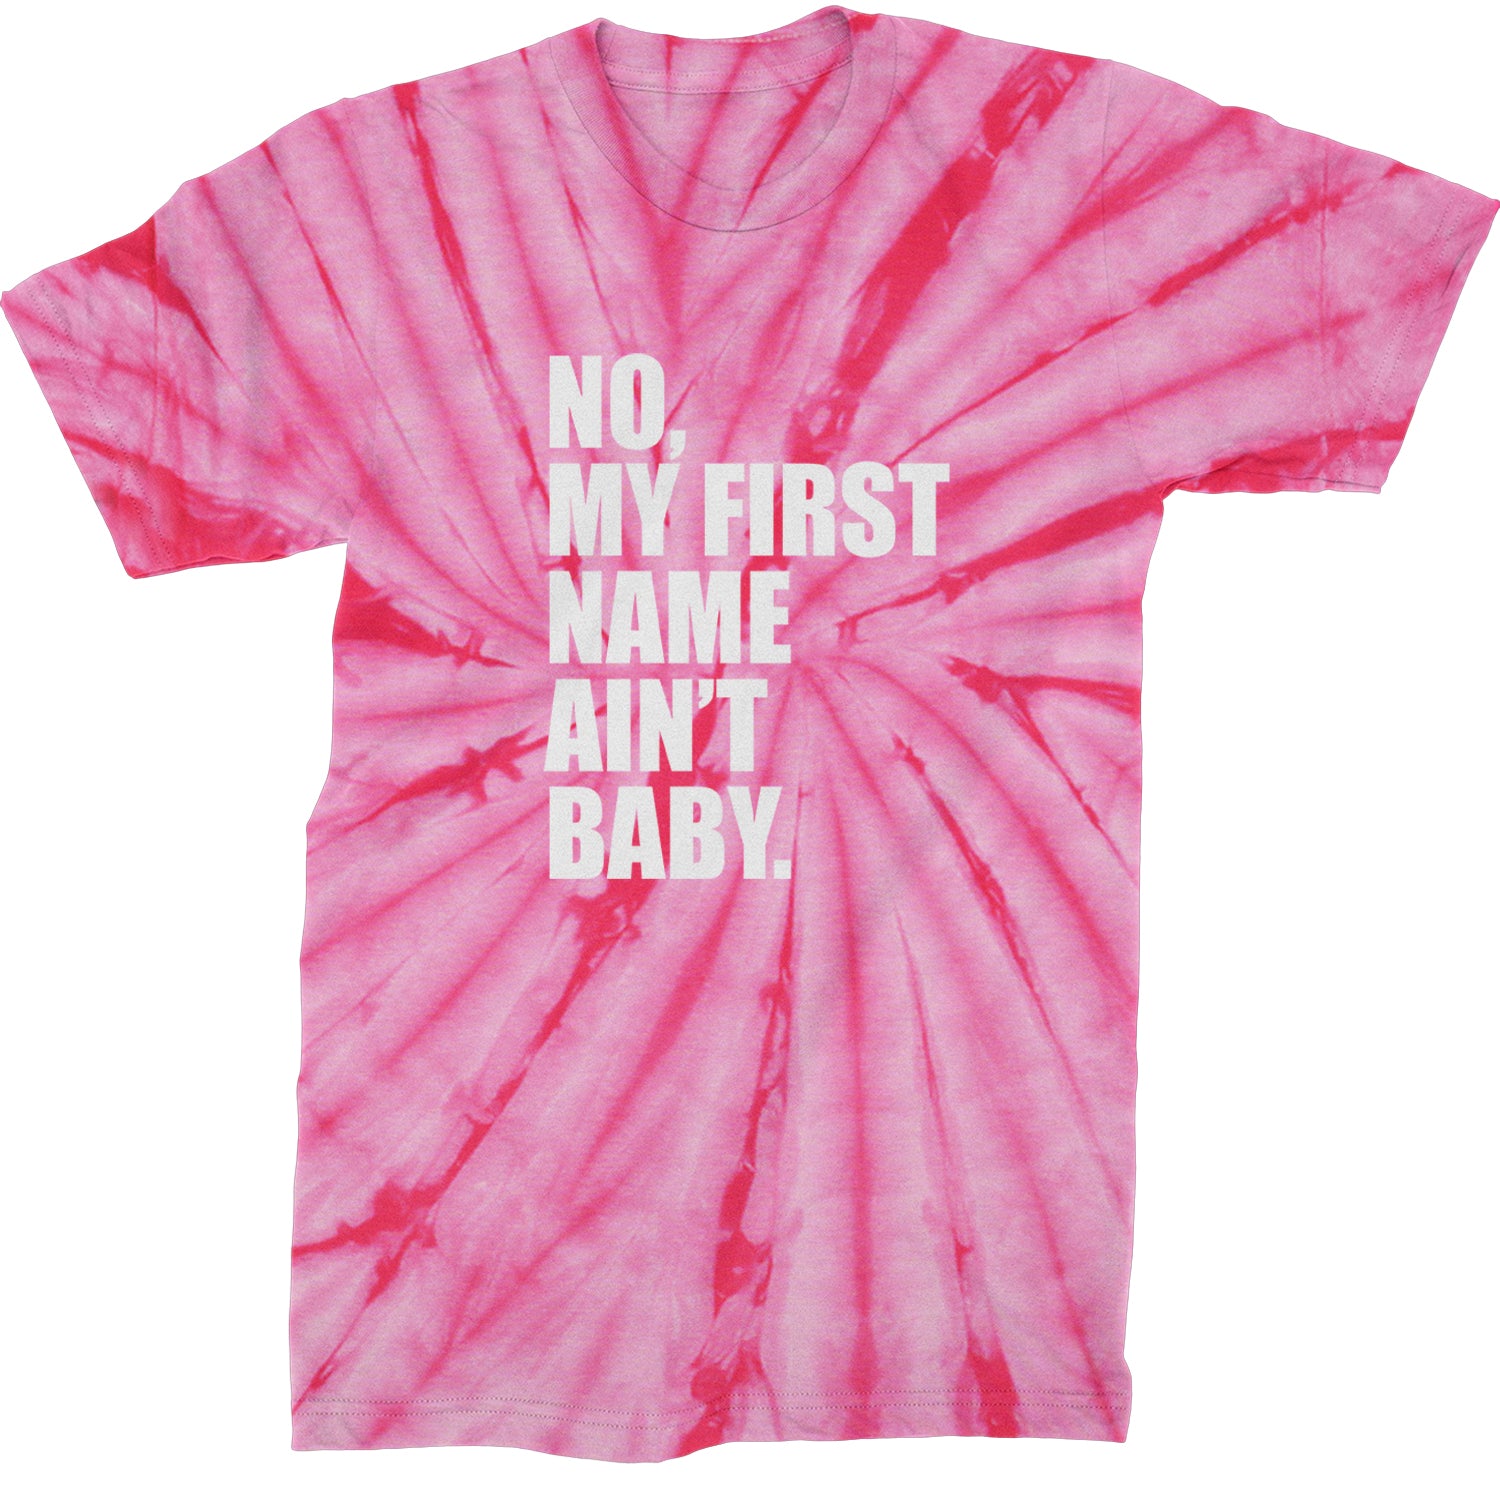 No My First Name Ain't Baby Together Again Mens T-shirt Tie-Dye Spider Pink